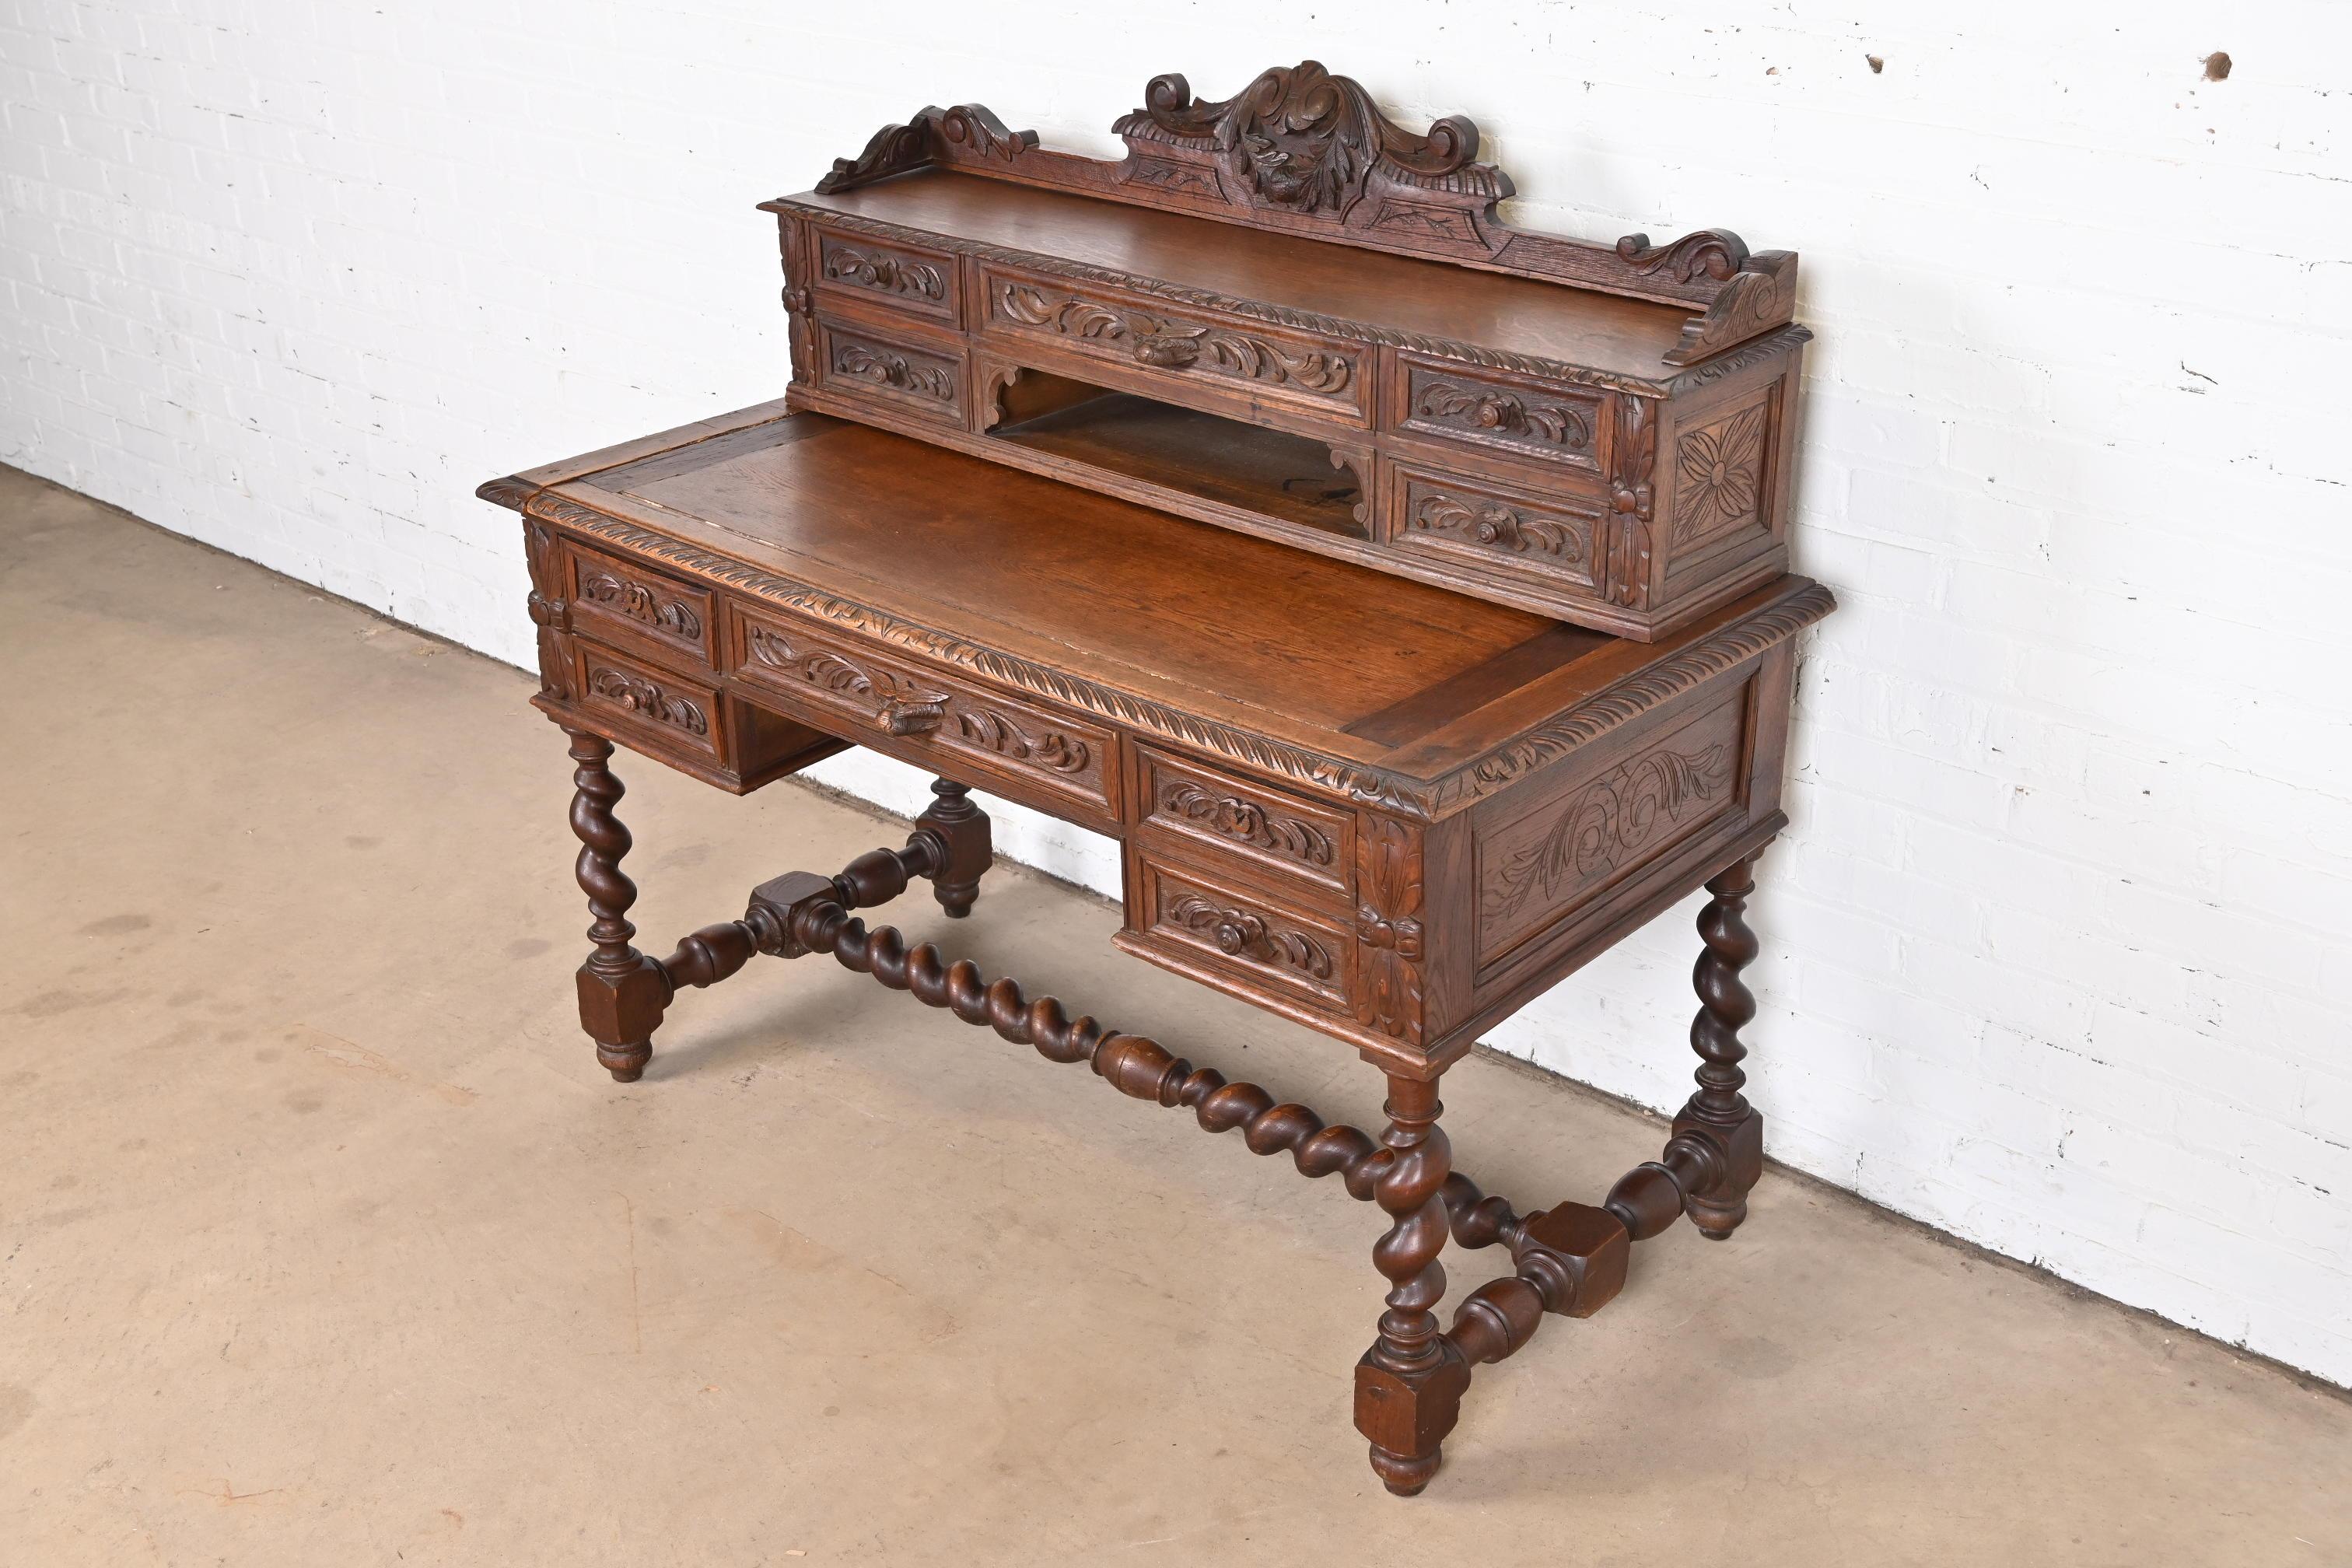 19th Century French Black Forest Carved Oak Writing Desk With Barley Twist Legs For Sale 1